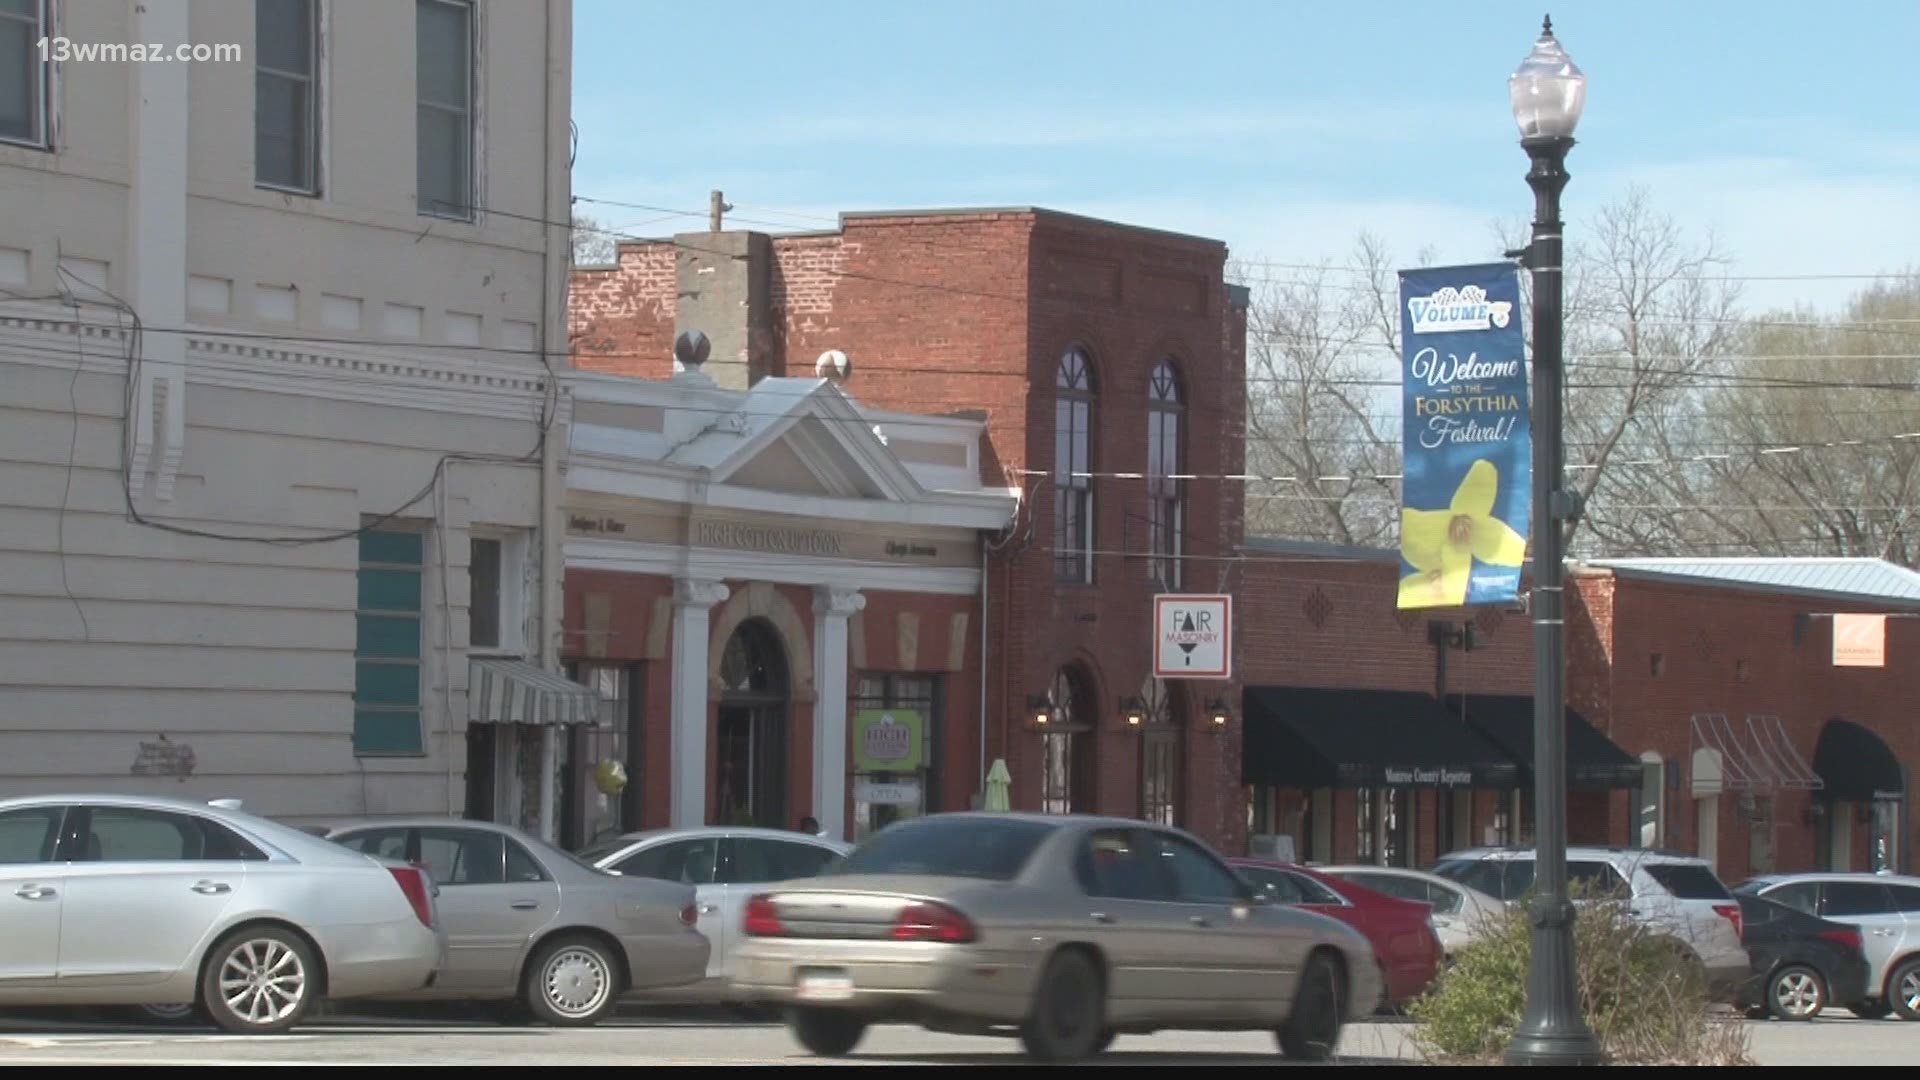 After missing a year because of COVID-19, people in Forsyth are getting ready to once again celebrate a spring tradition, although a little later this year.